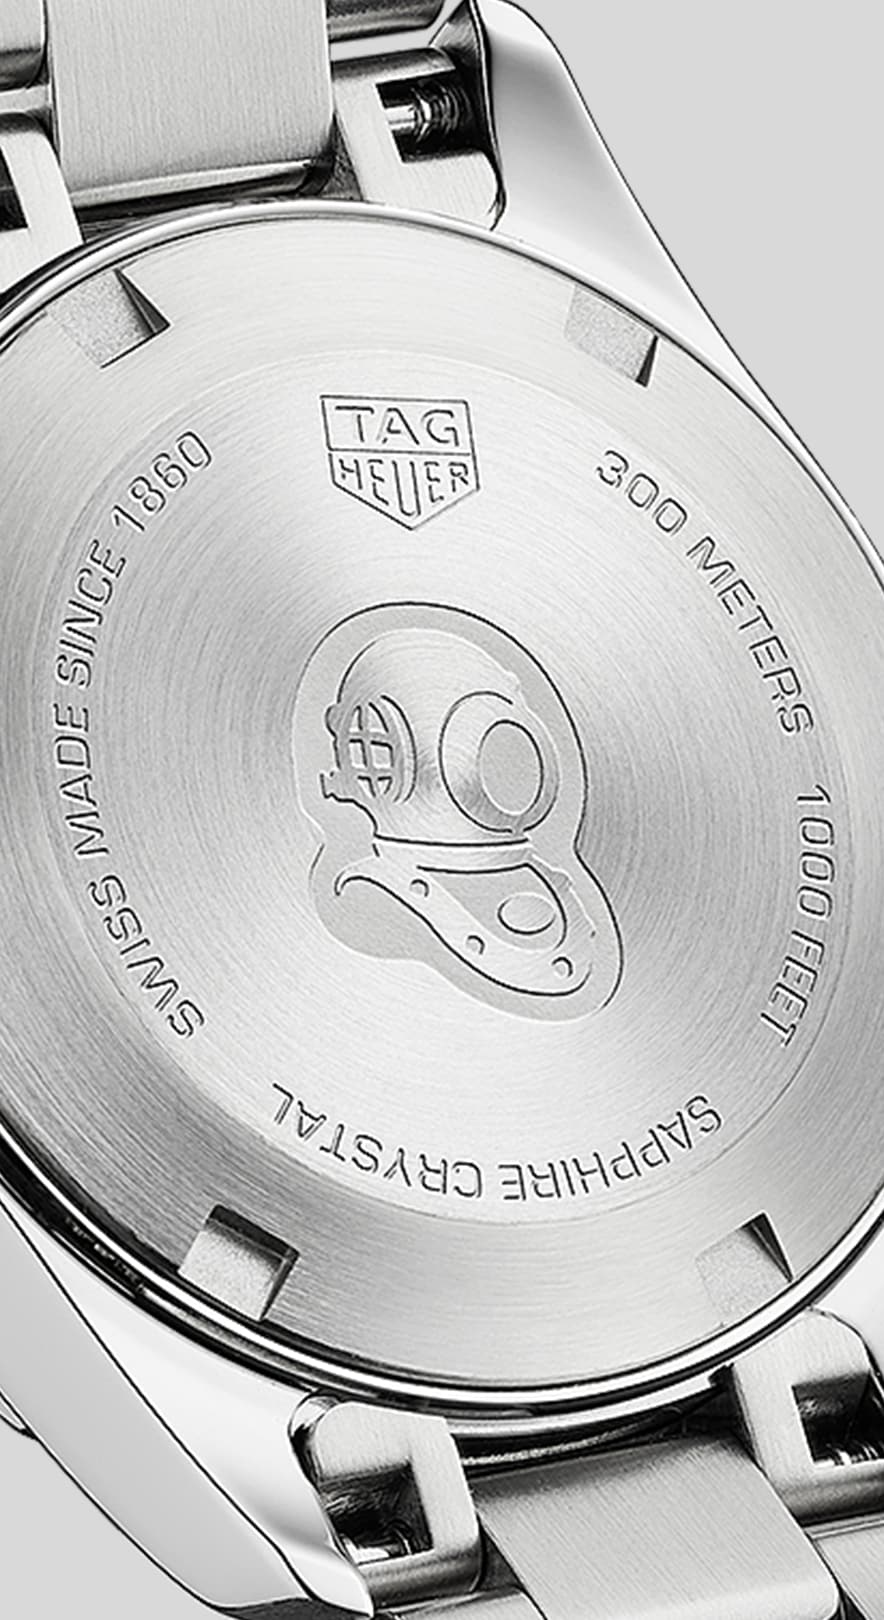 TAG Heuer With Good Item Box [TAG HEUER] TAG Heuer Carrera Calibre 1887 Chronograph CAR2012-0 Automatic Winding Men's [ev15] [Used]TAG Heuer With Good Item Box [TAG HEUER] TAG Heuer Carrera Calibre 7 Twin Time WAR2010-0 Automatic Winding Men's [Used]